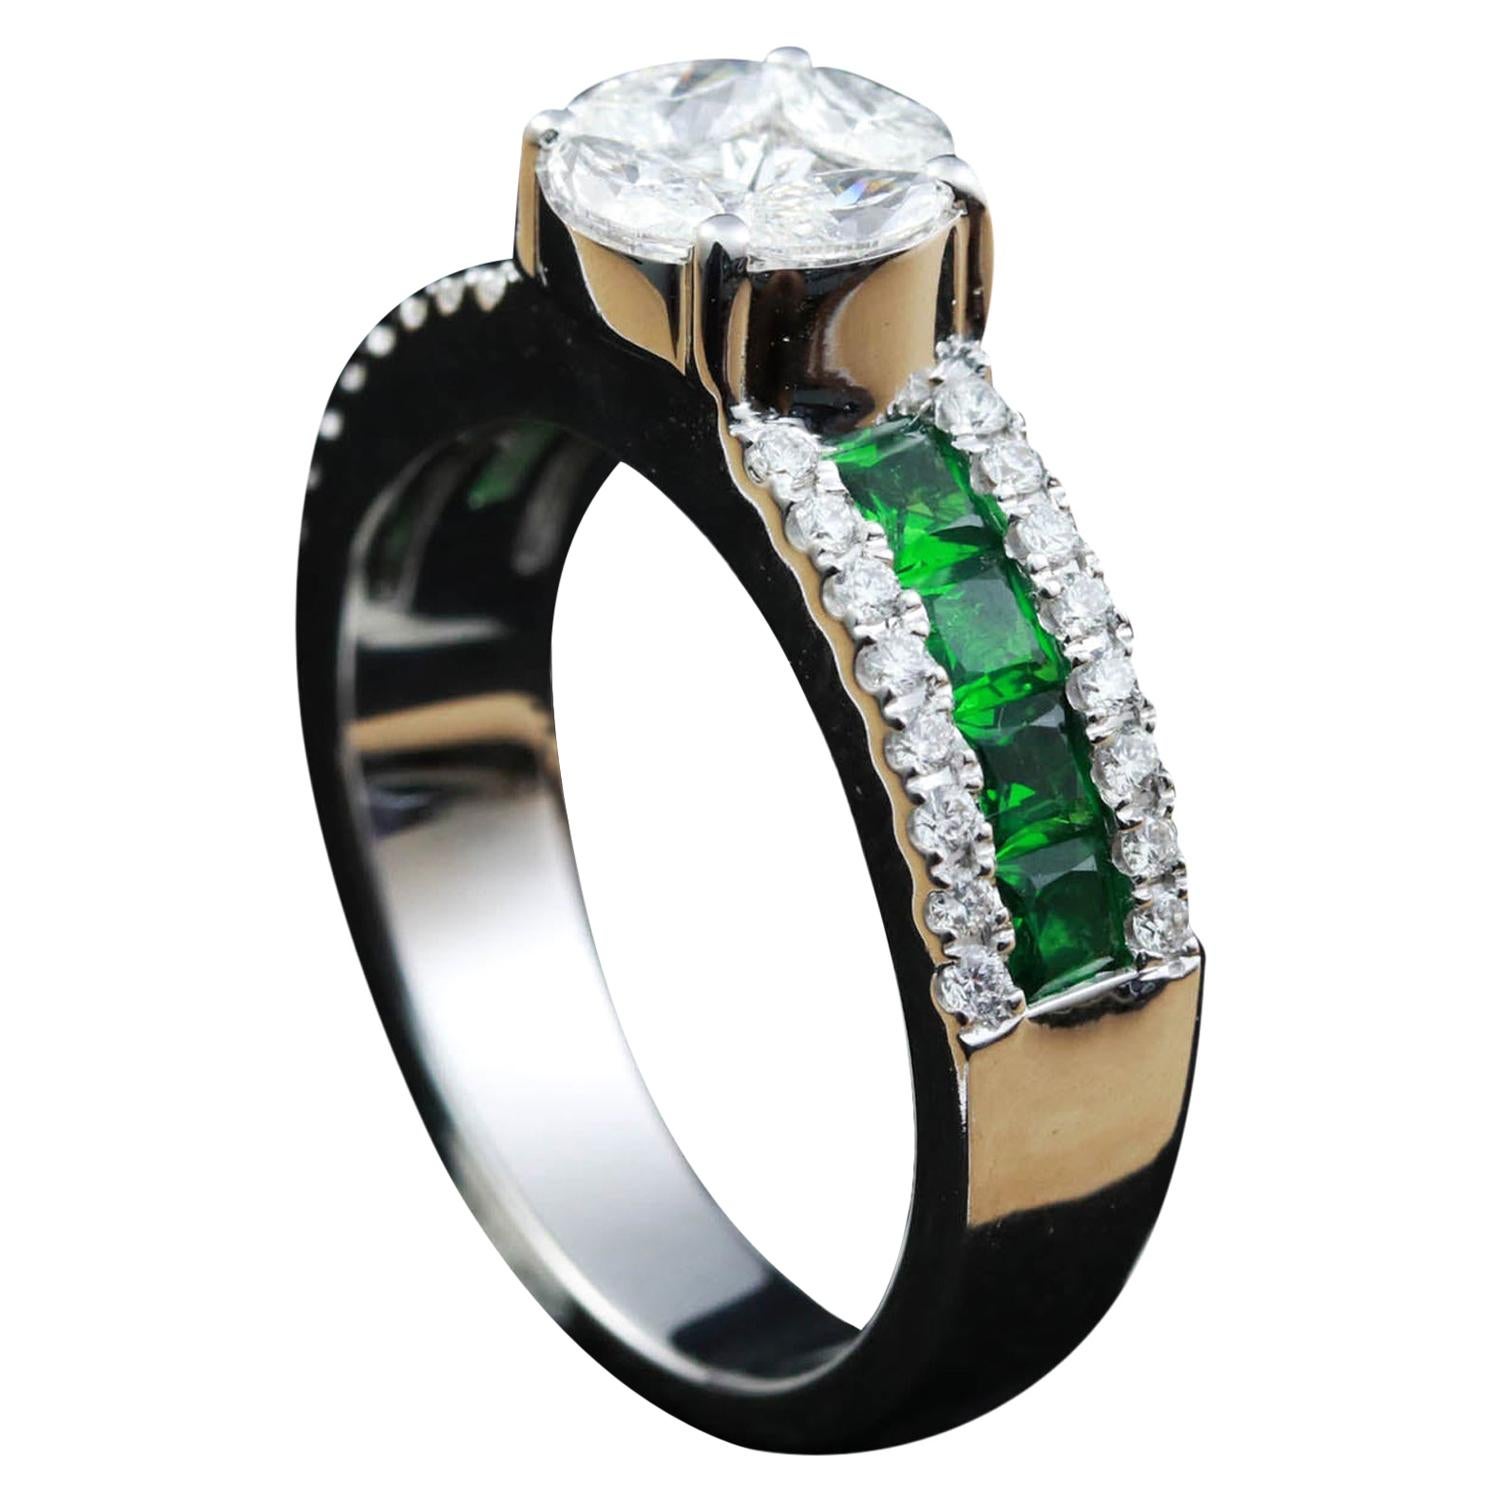 For Sale:  Round Diamond Illusion with Gemstone Cocktail Ring in 18 Karat Gold